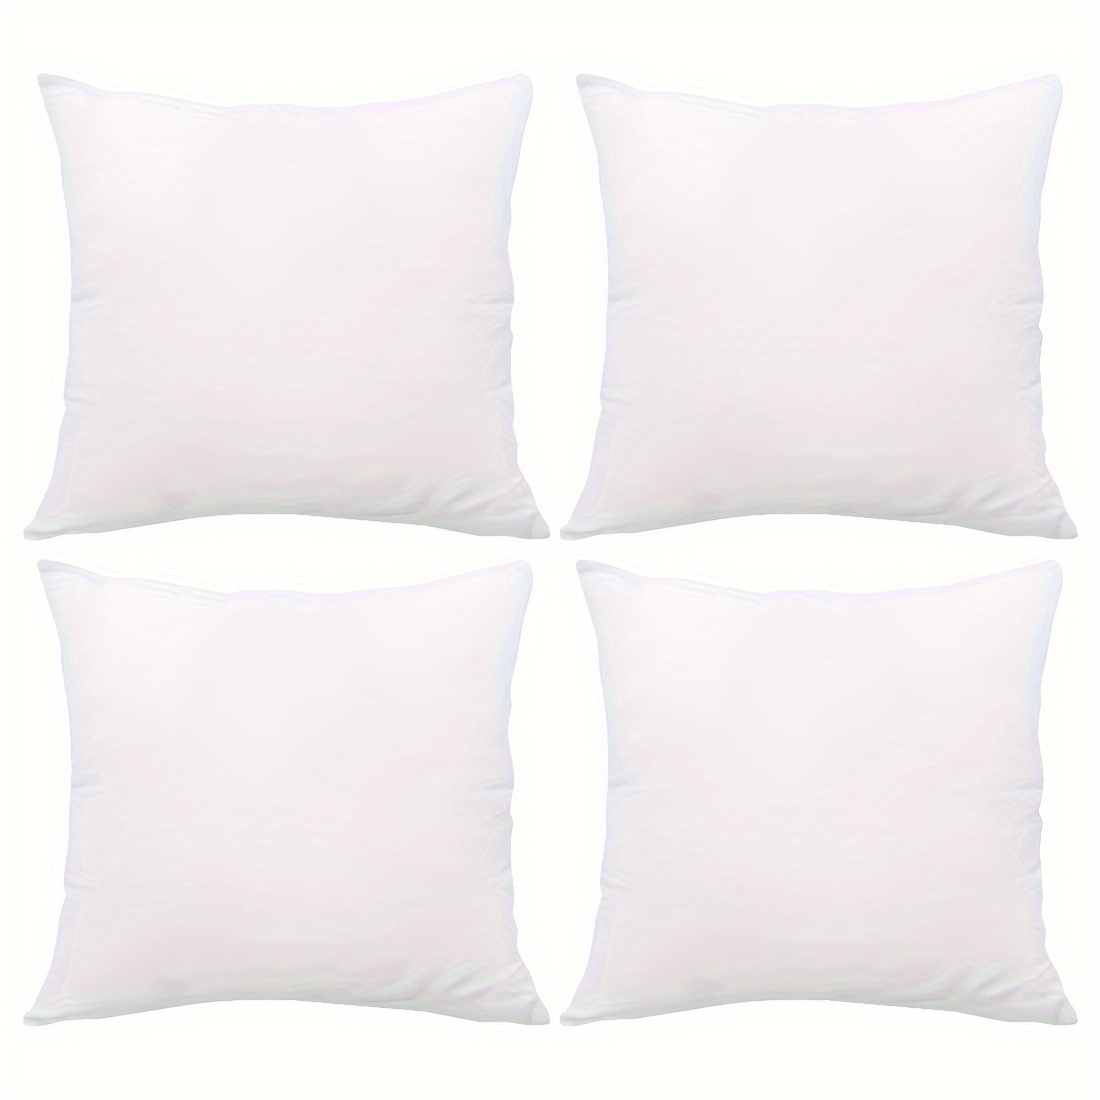 

4pcs Blank White Four-piece Set Peach Leather Throw Pillow Cover, Home Comfortable Pillow Cover, Cushion Cover For Living Room Bedroom Sofa (without Pillow Core)